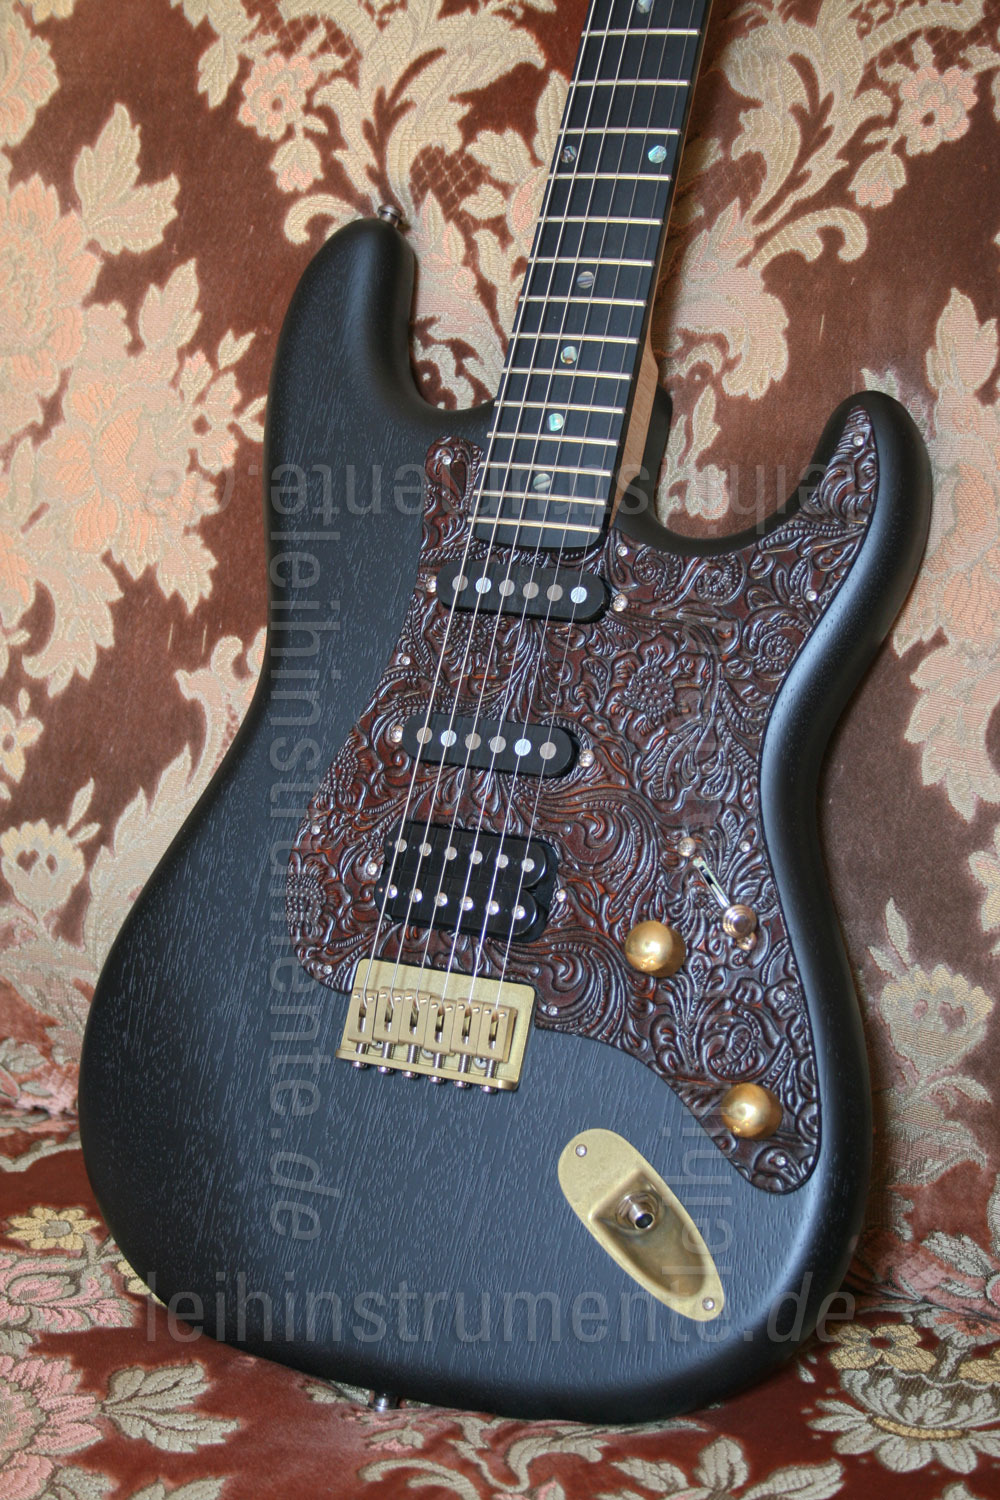 to article description / price Electric Guitar BERSTECHER Deluxe Vintage (Hot B) - Black / Floral Brown + hard case - made in Germany